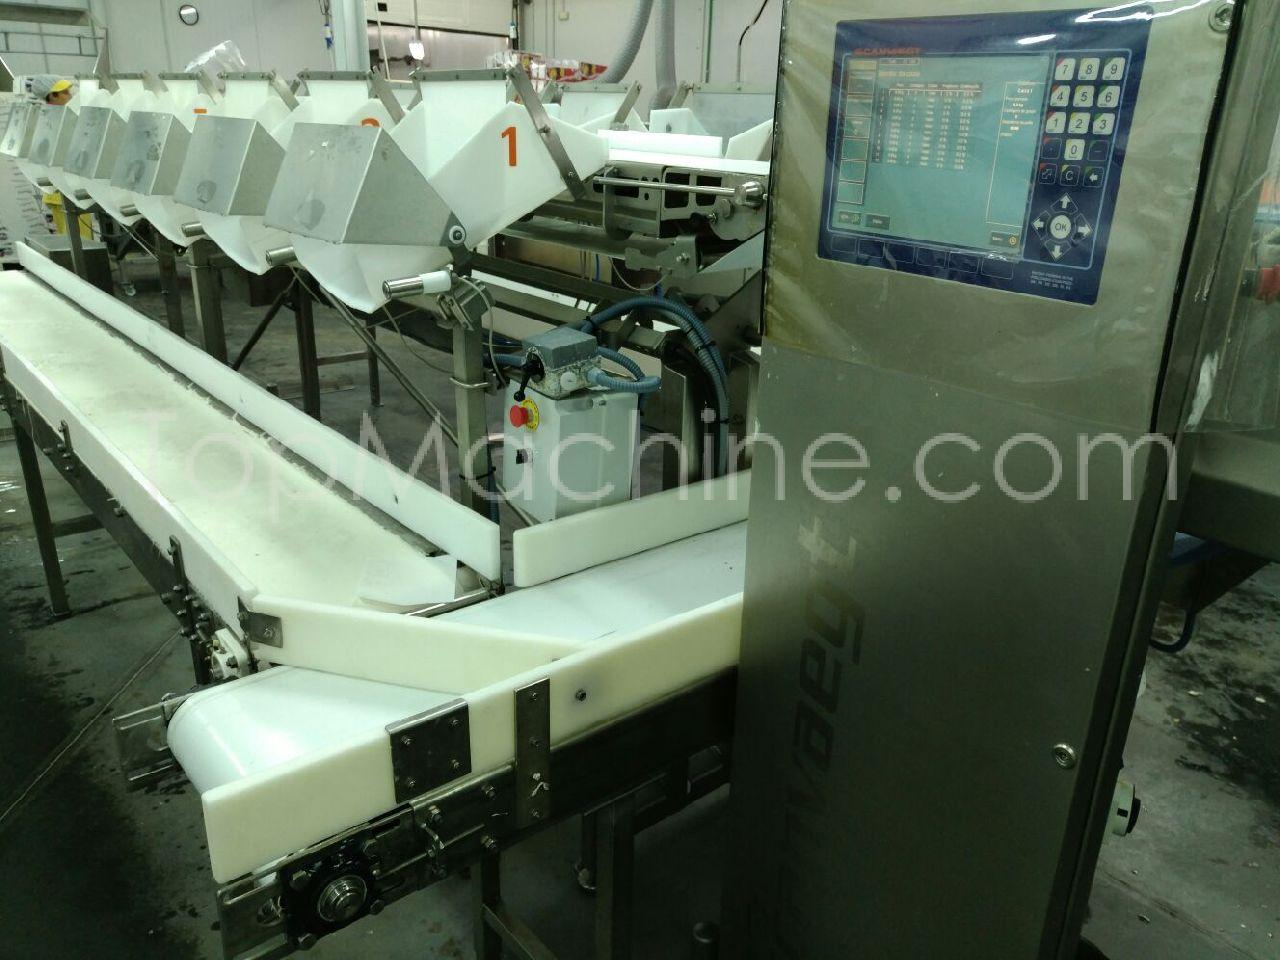 Used Scanvaegt Scanbatcher 4700 Food Packing, Weighers, Sorters